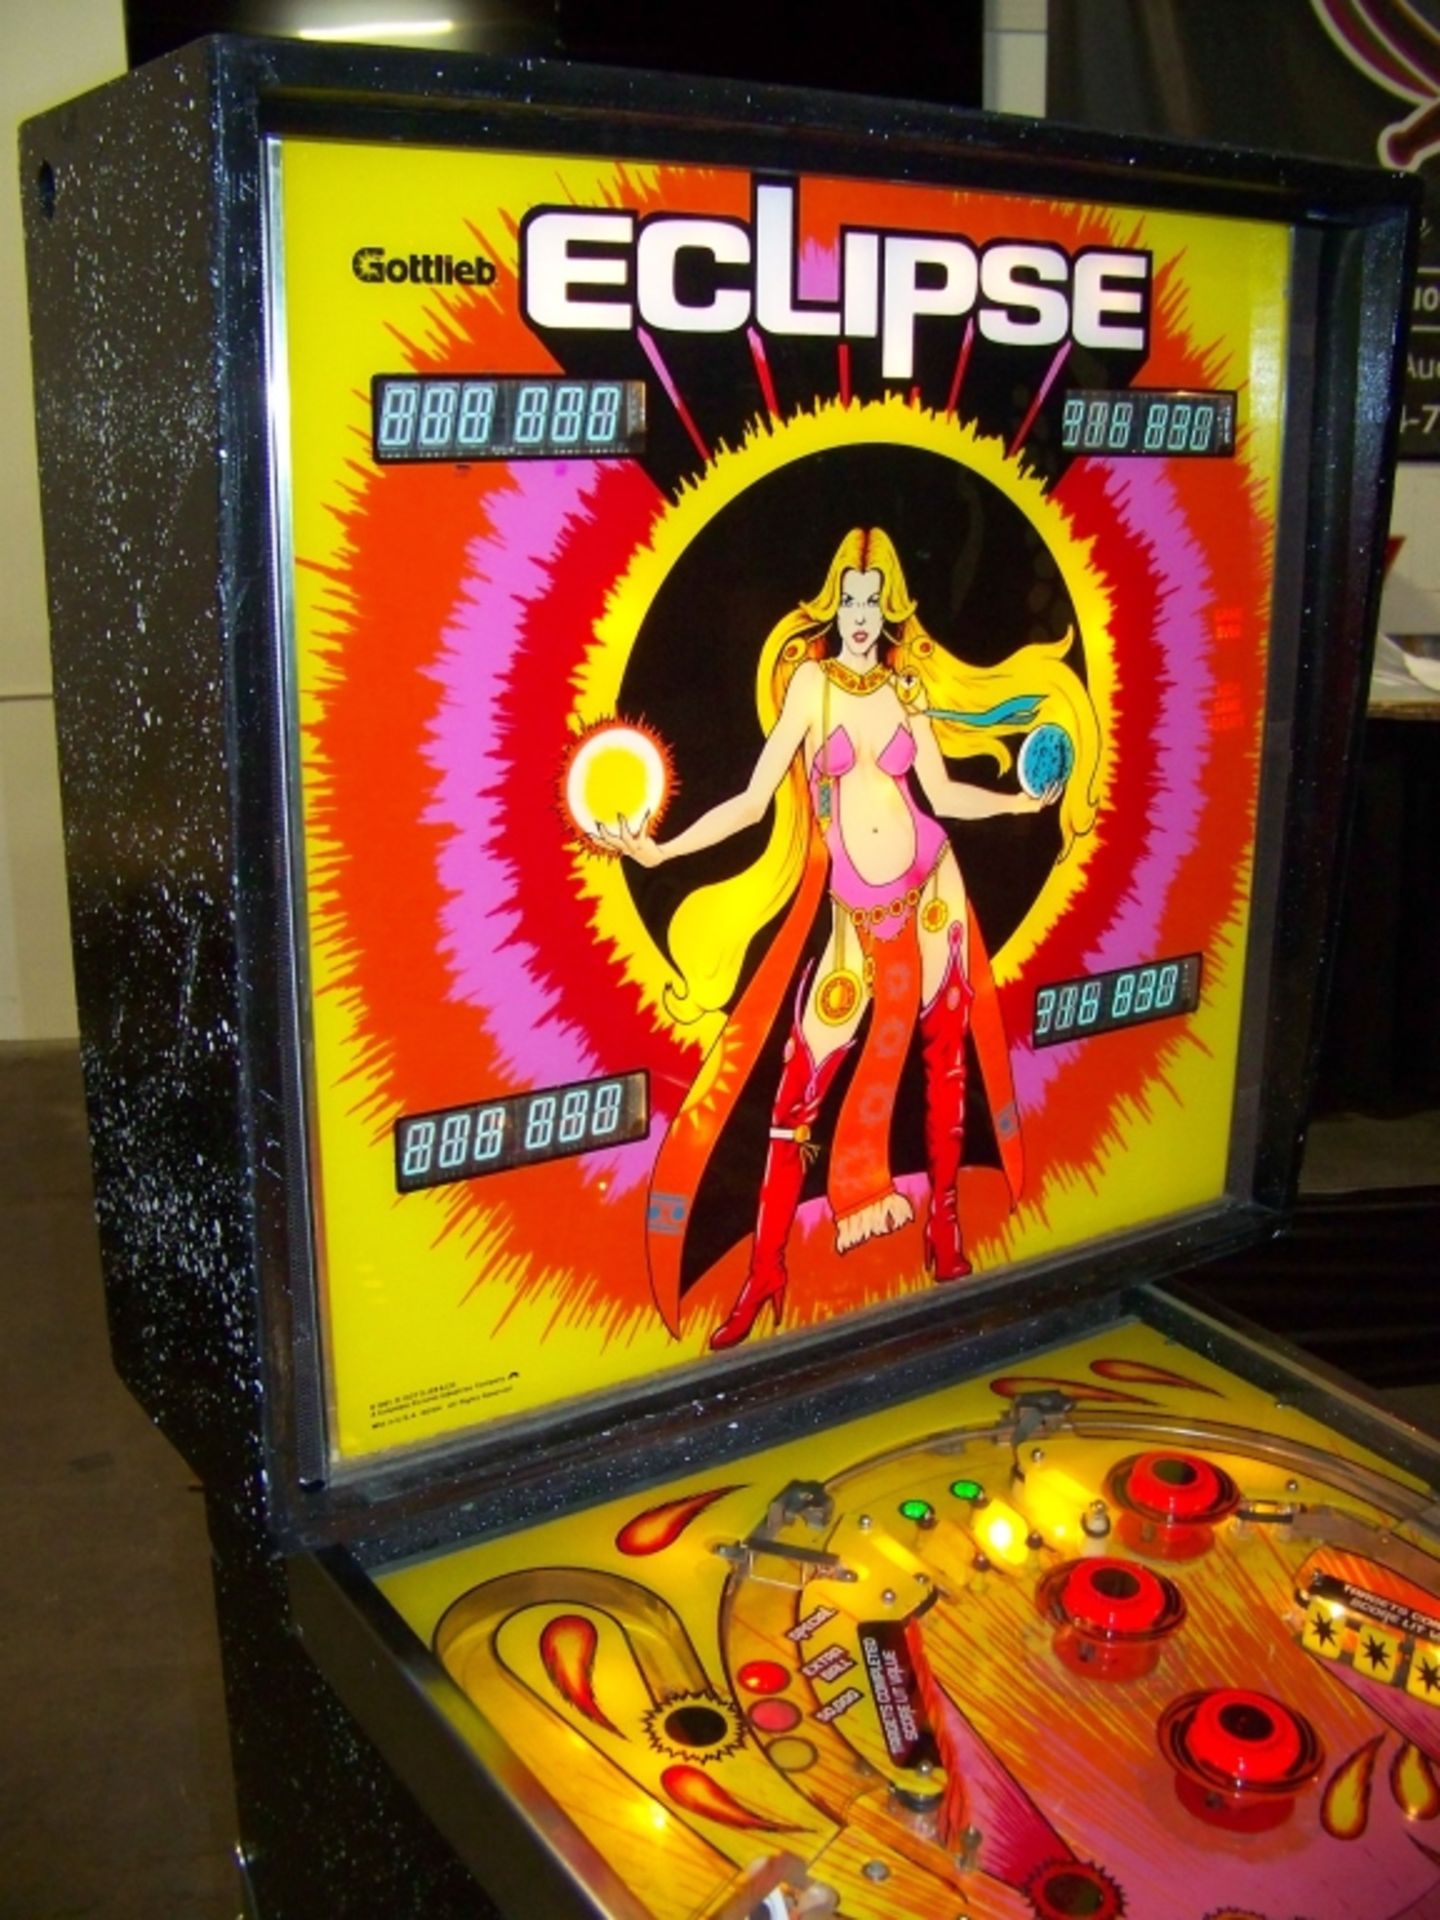 ECLIPSE PINBALL MACHINE RARE GOTTLIEB TITLE 1982 Item is in used condition. Evidence of wear and - Image 4 of 11